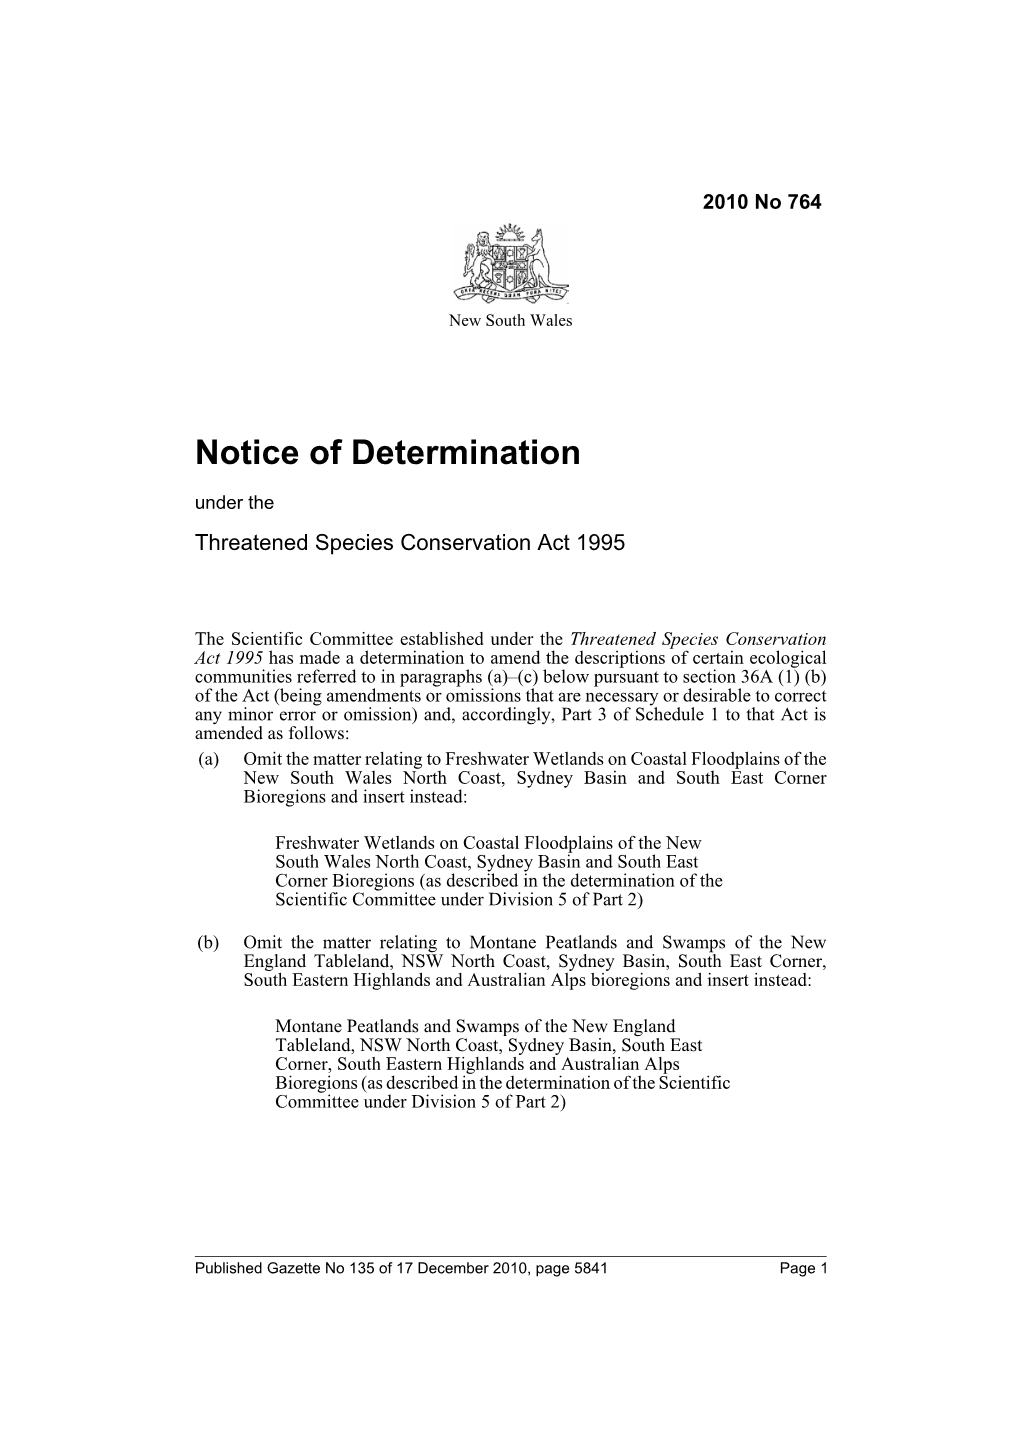 Notice of Determination Under the Threatened Species Conservation Act 1995